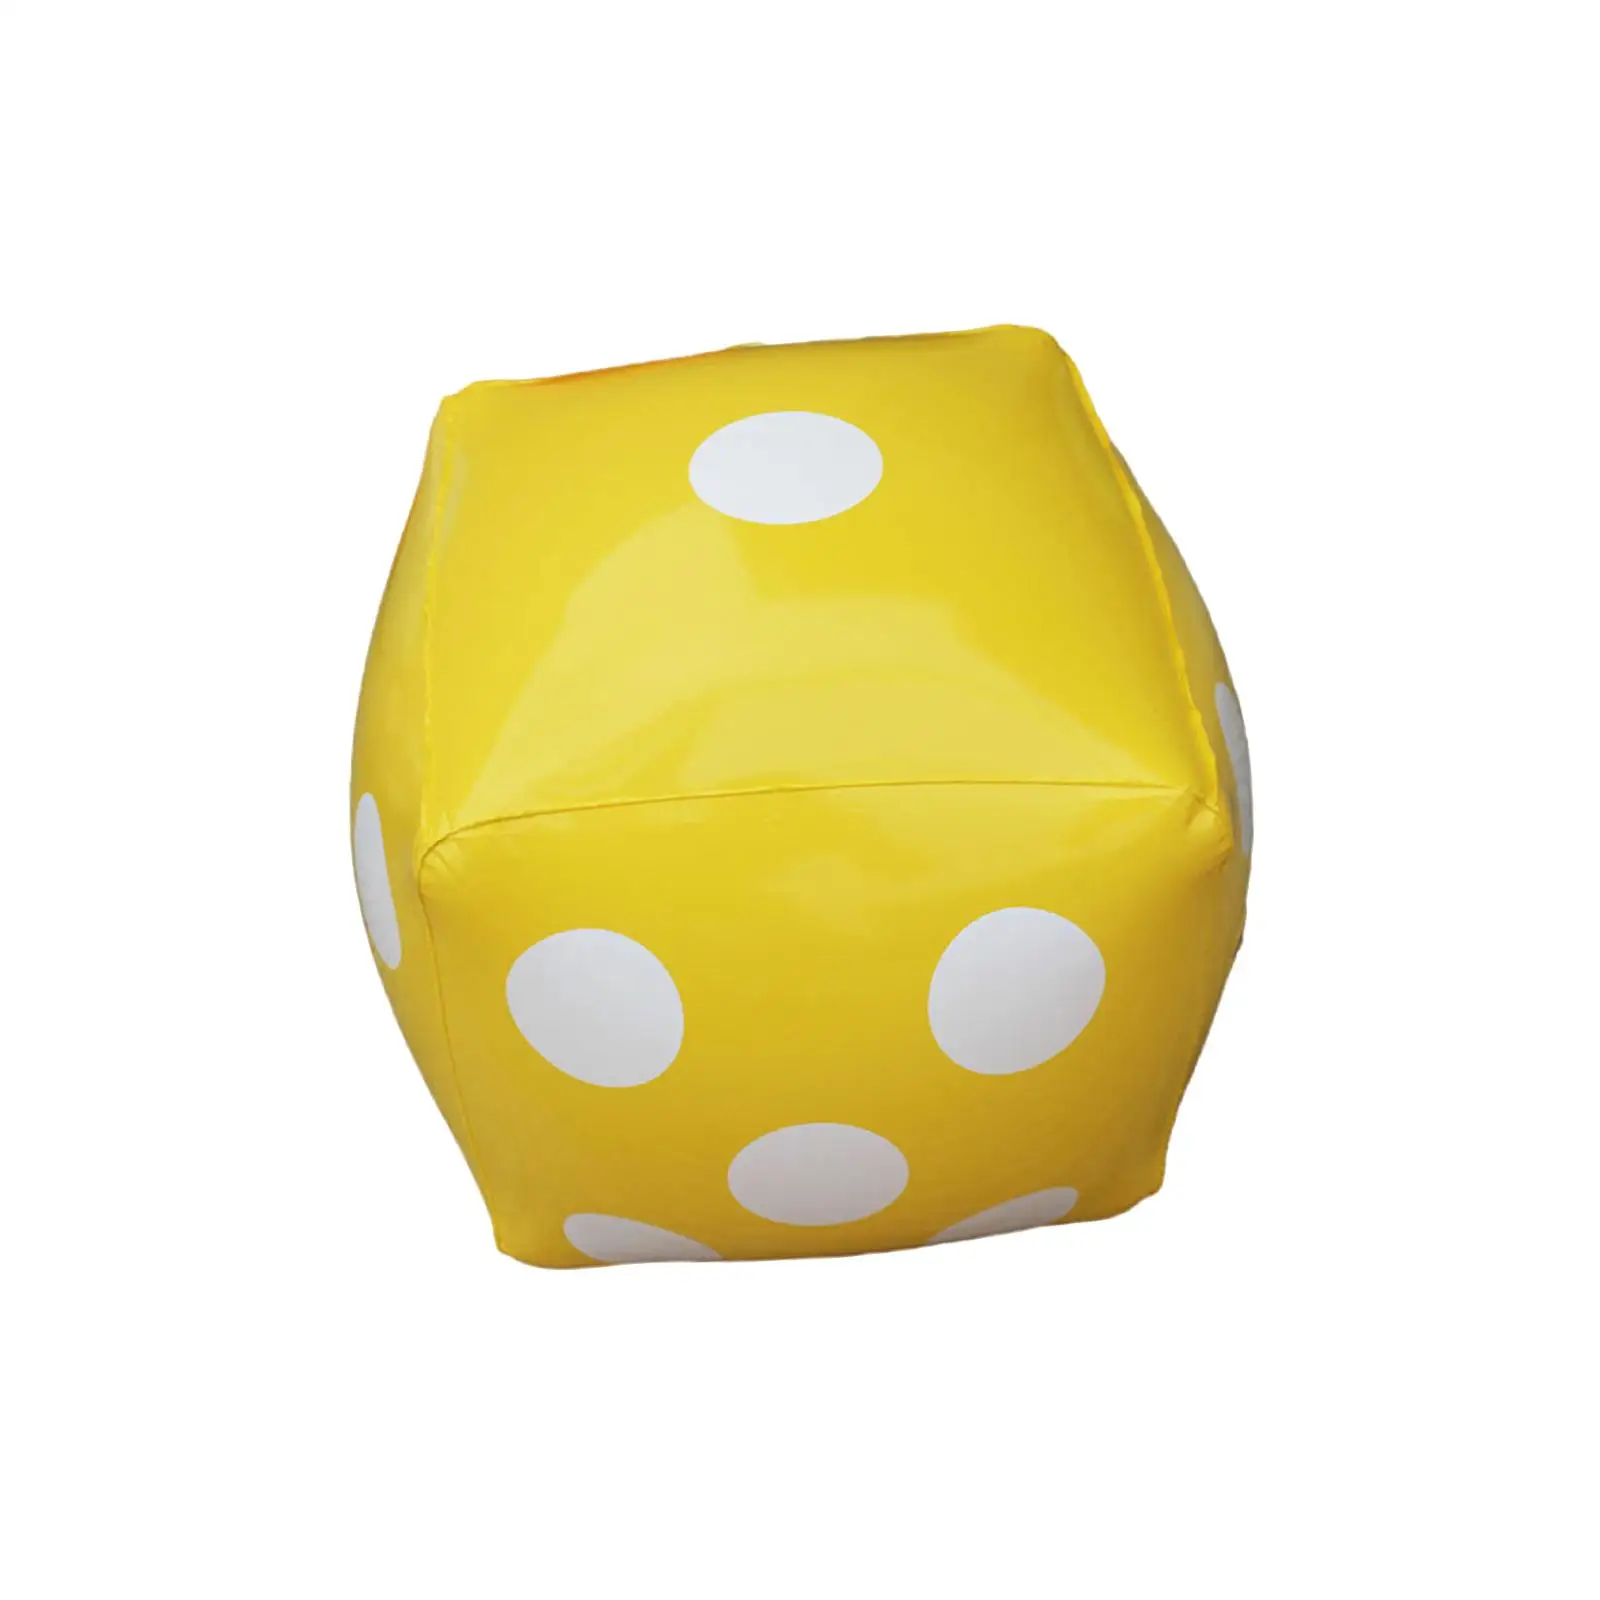 Giant Inflatable Dice 60cm Cube Novelty Decoration Jumbo Inflatable Dice for Club Family Game Kids Toys Pools Outdoor Activities